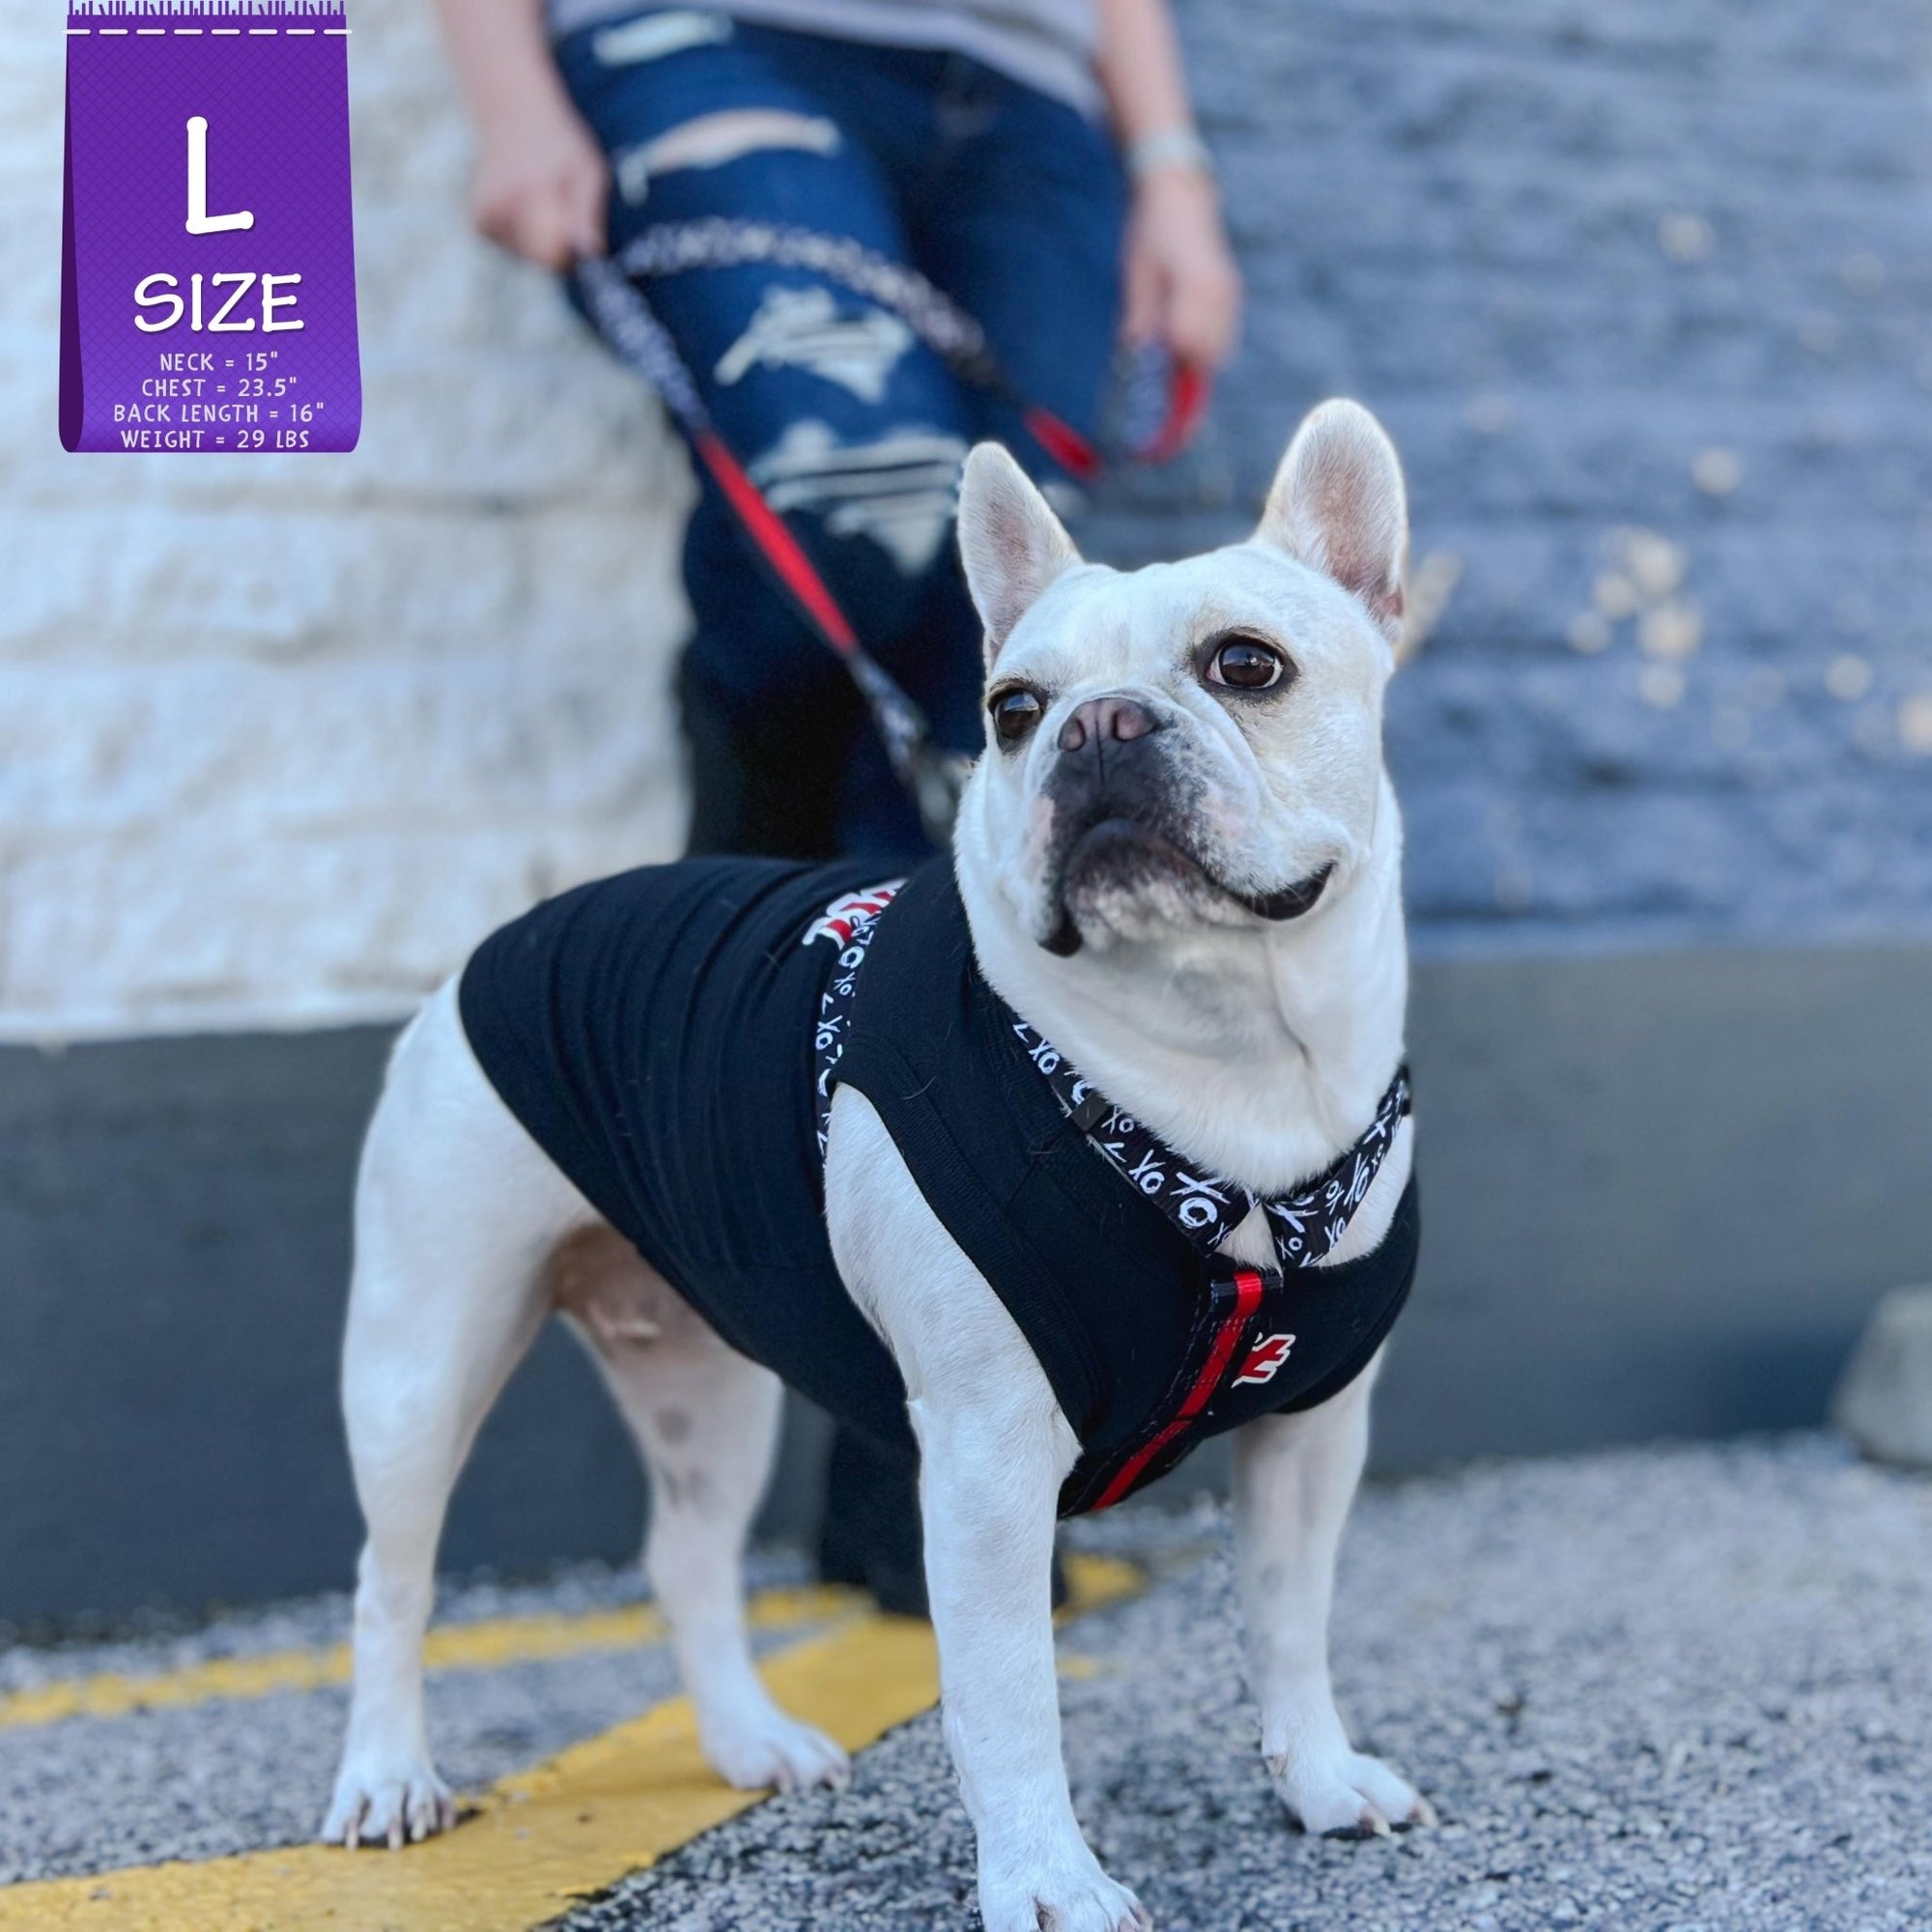 Dog T-Shirt - French Bulldog wearing &quot;Sorry Not Sorry&quot; black dog t-shirt with red and white hashtag emoji on chest and red and white lettering on back - standing outdoors in a parking lot wearing XO H harness and matching leash in black, white and red - Wag Trendz